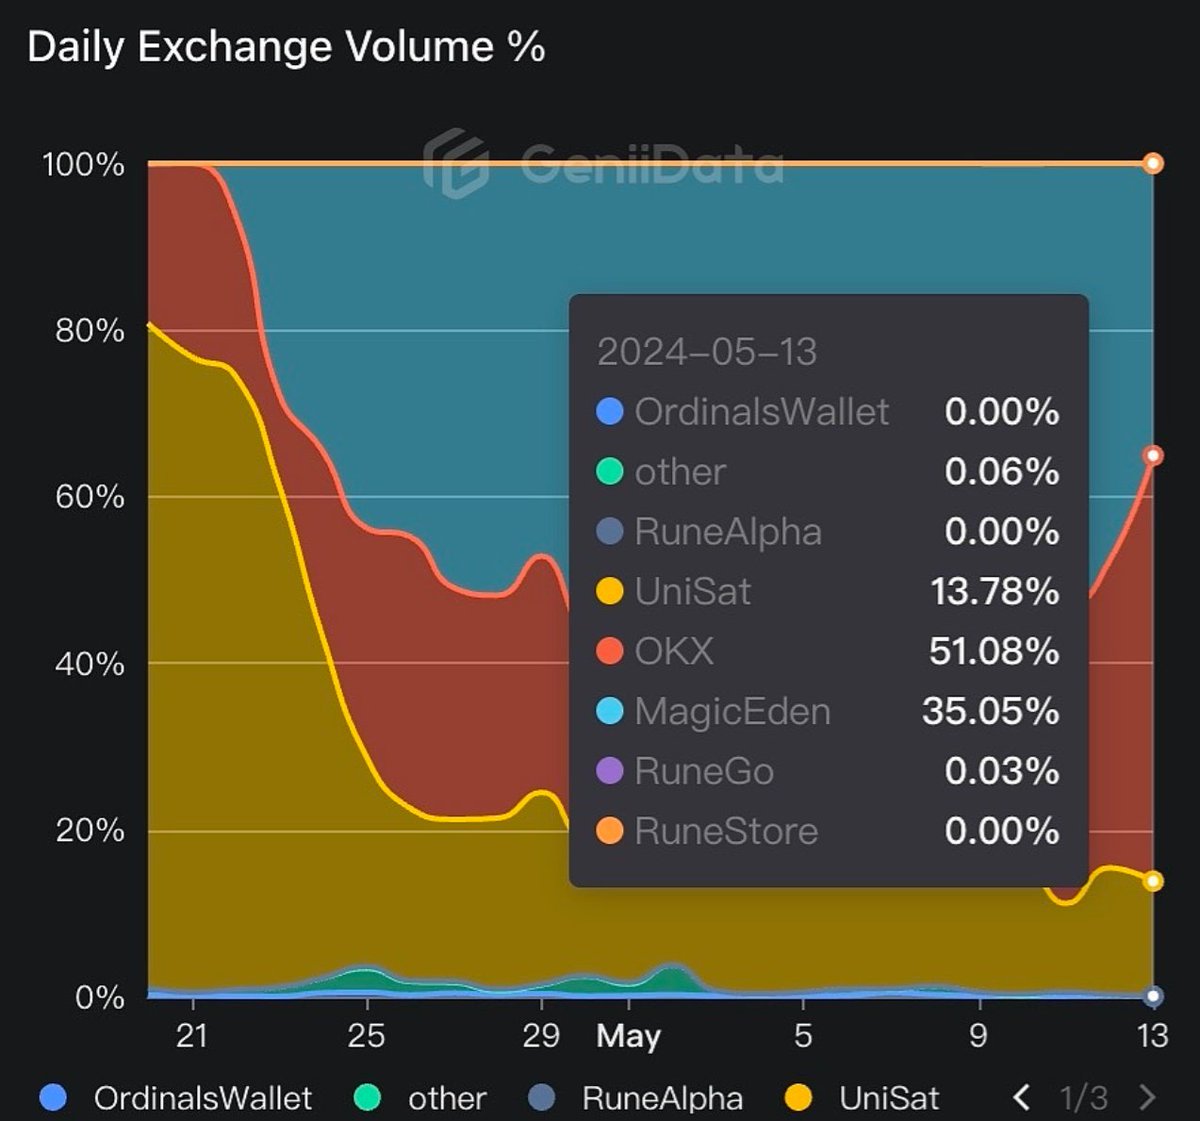 #Crypto exchange @okx now holds over 50% of Bitcoin #Runes daily trading volume.